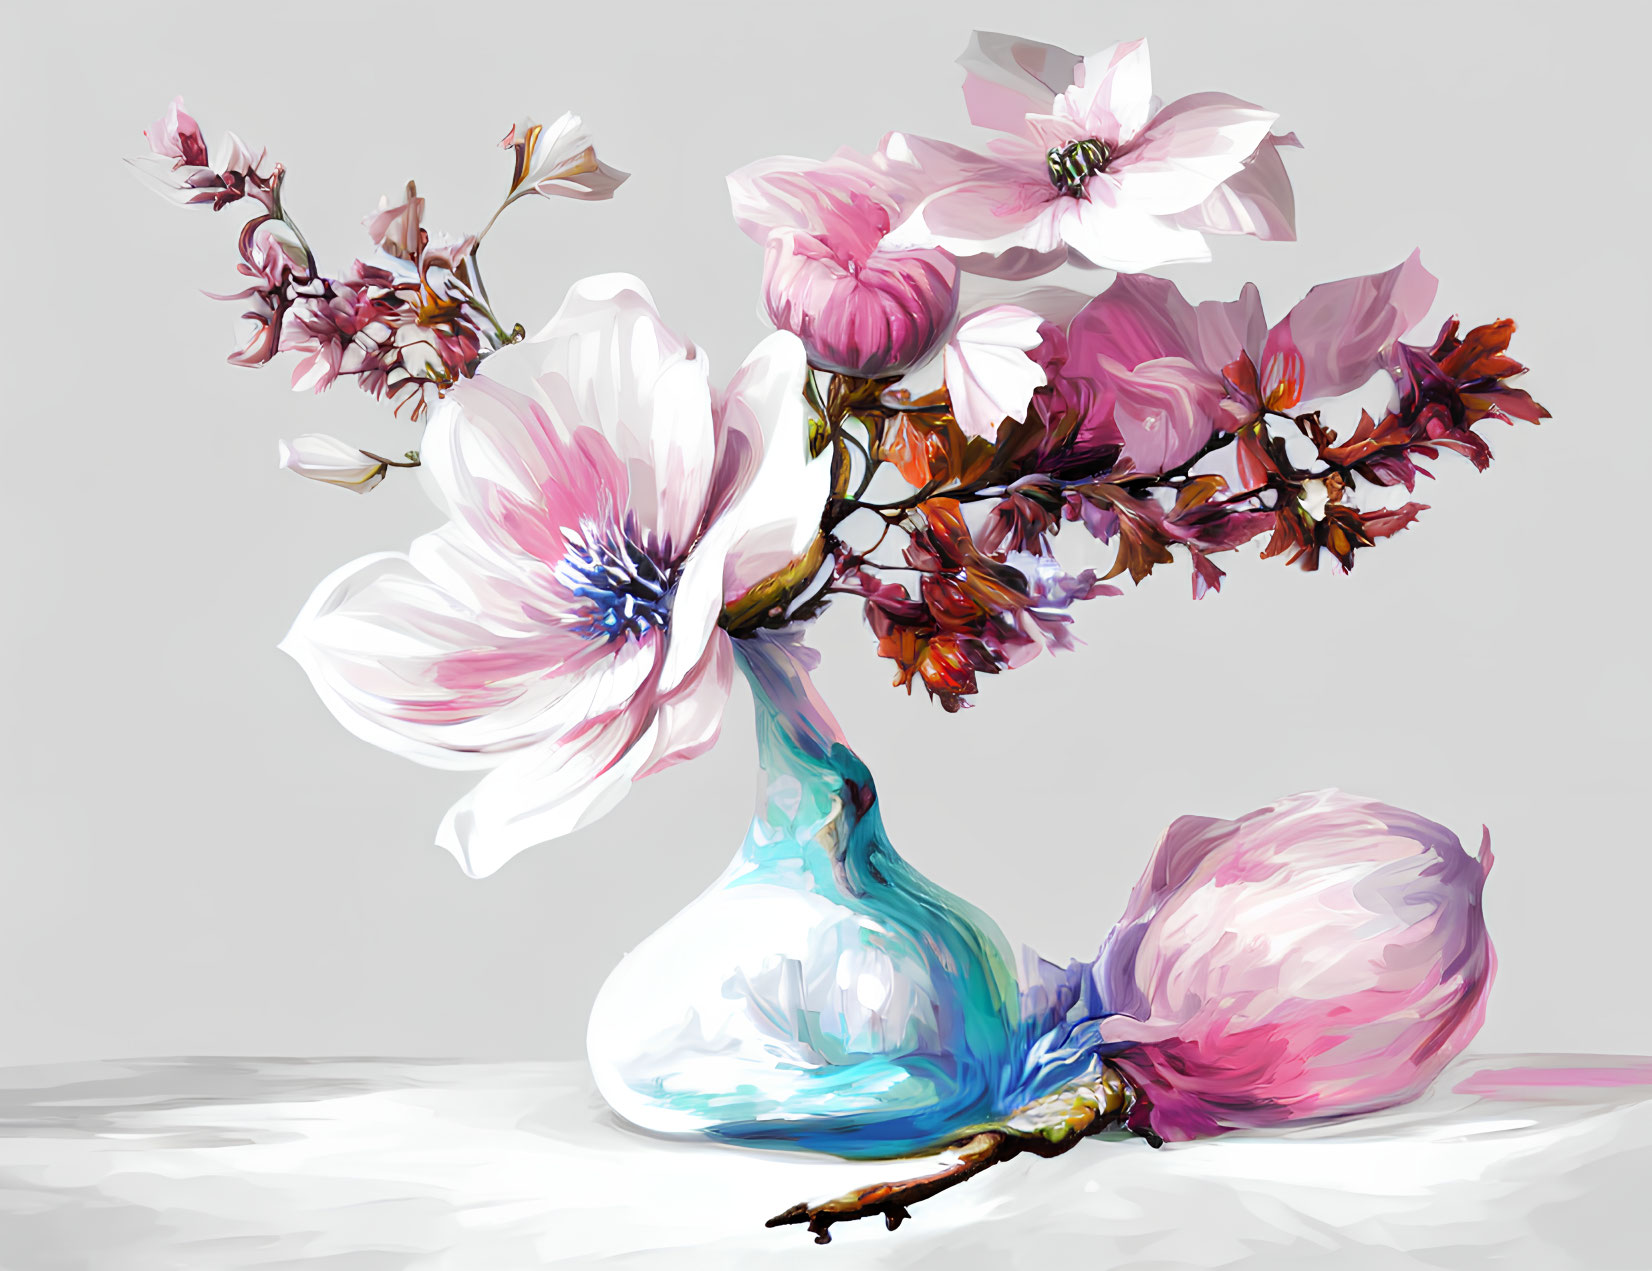 Pink and White Cherry Blossoms in Blue Vase with Fallen Petal - Digital Painting